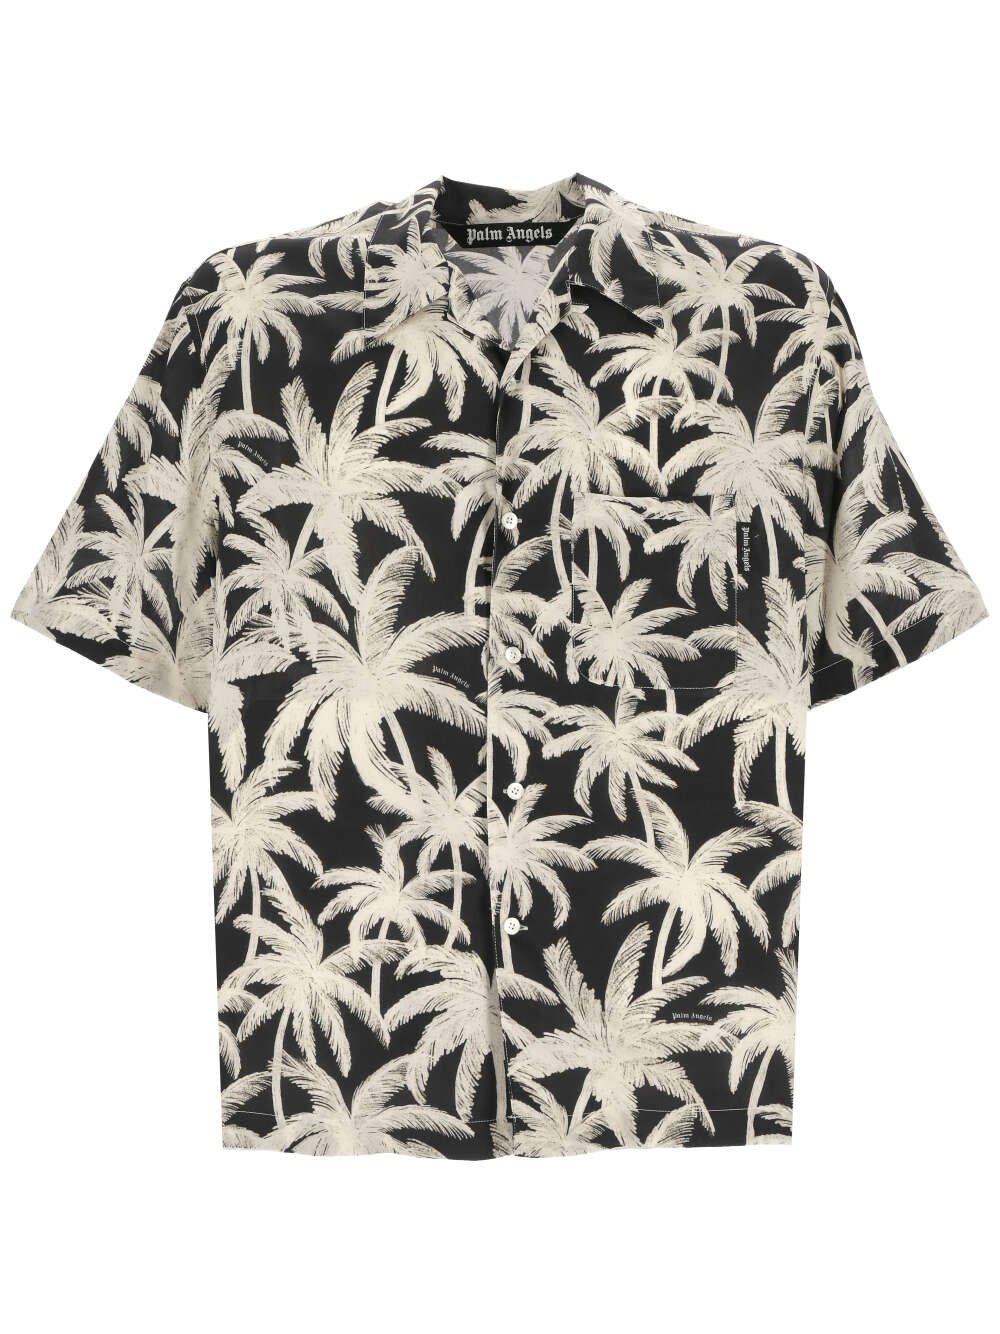 Shop Palm Angels All-over Palm Printed Short-sleeved Shirt In Black